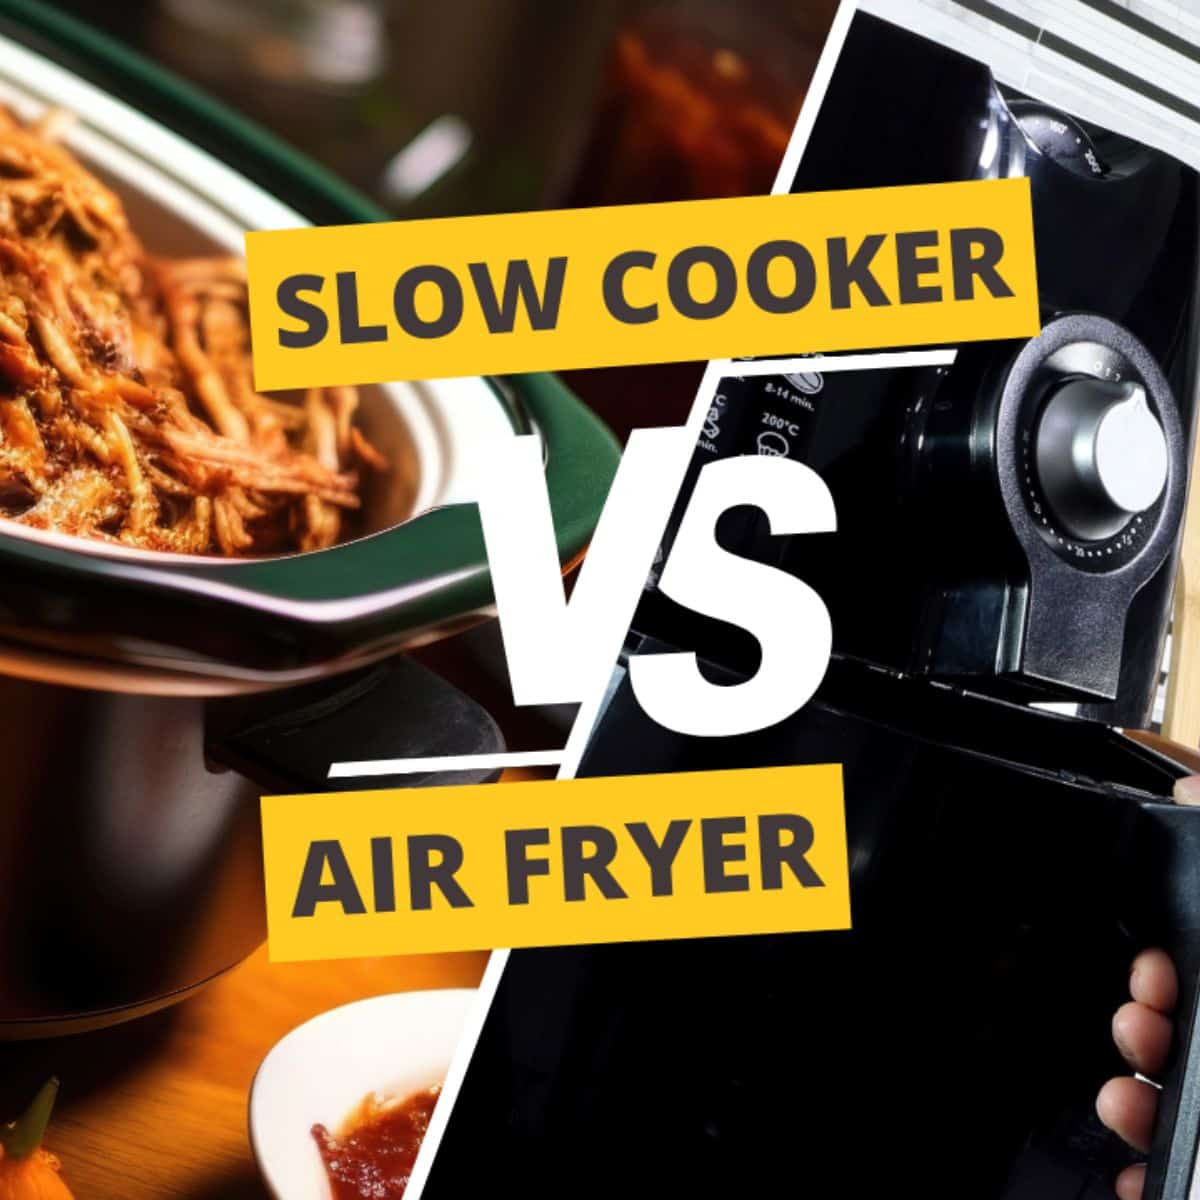 Quality on a Budget? A Cosori Air Fryer 5 QT Review - Also The Crumbs Please